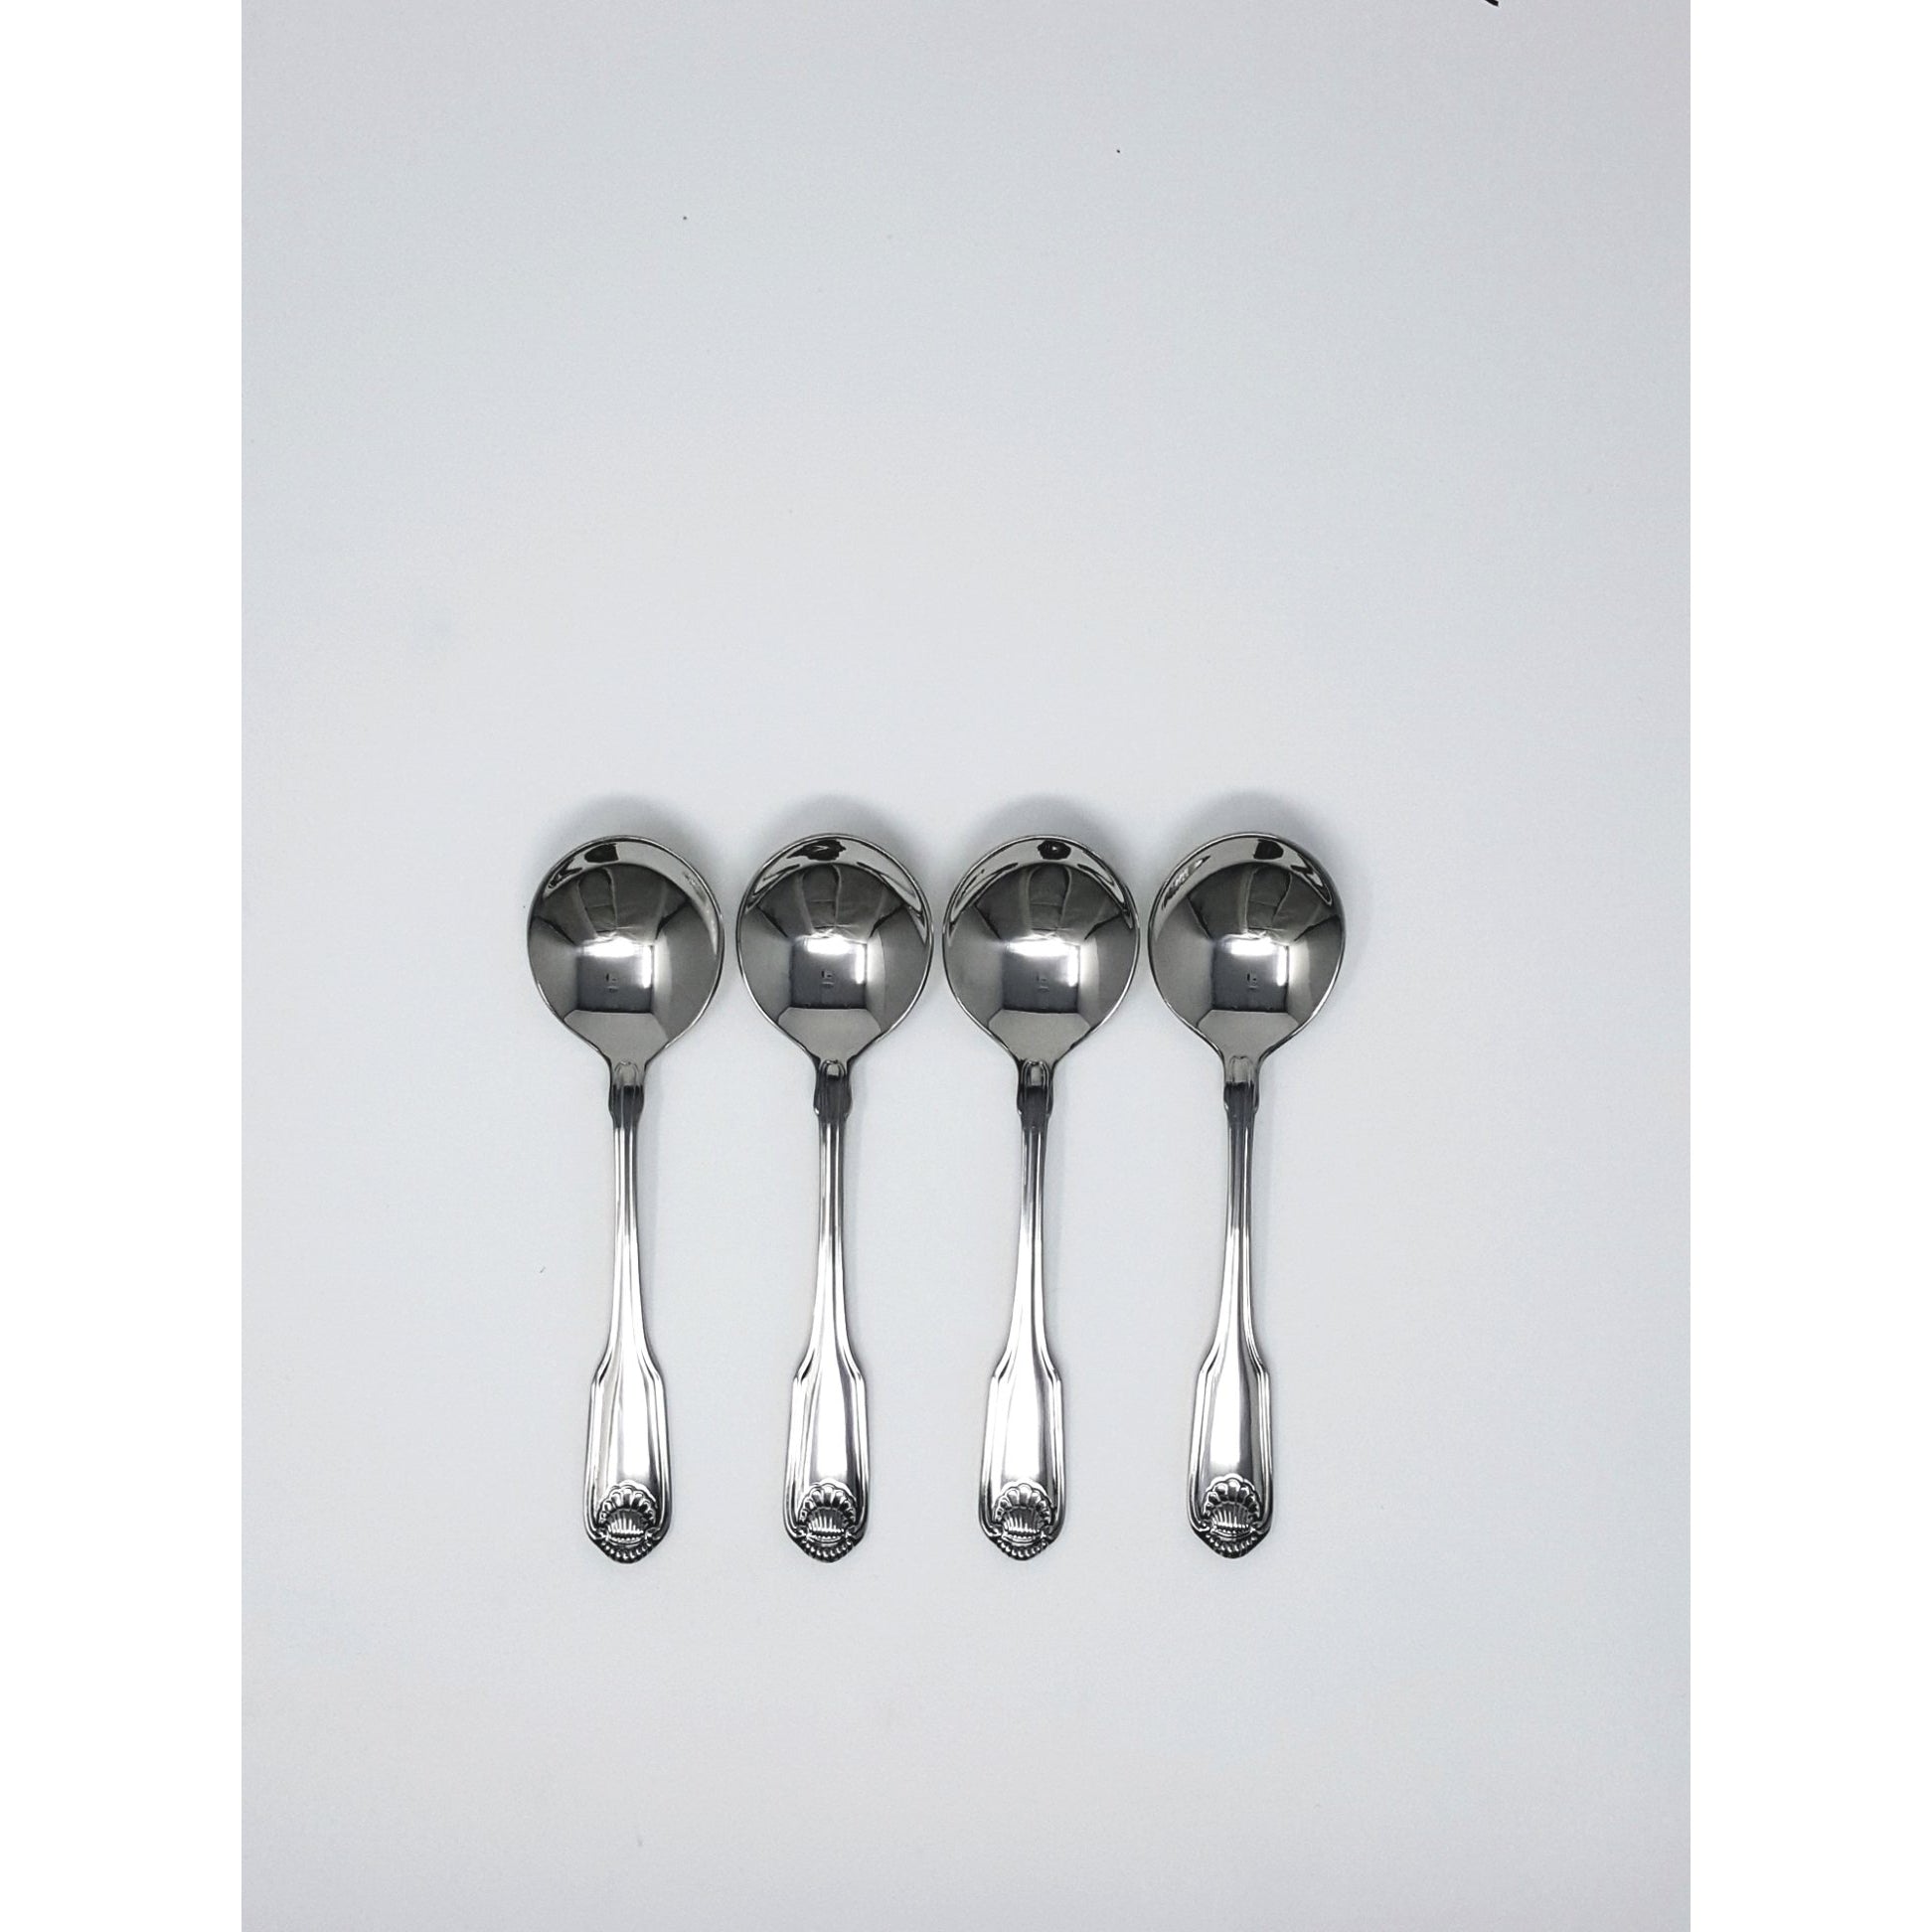 Oneida 2496STBF Classic Shell 18/10 Stainless Steel Tablespoon/Serving Spoons (Set of 12)